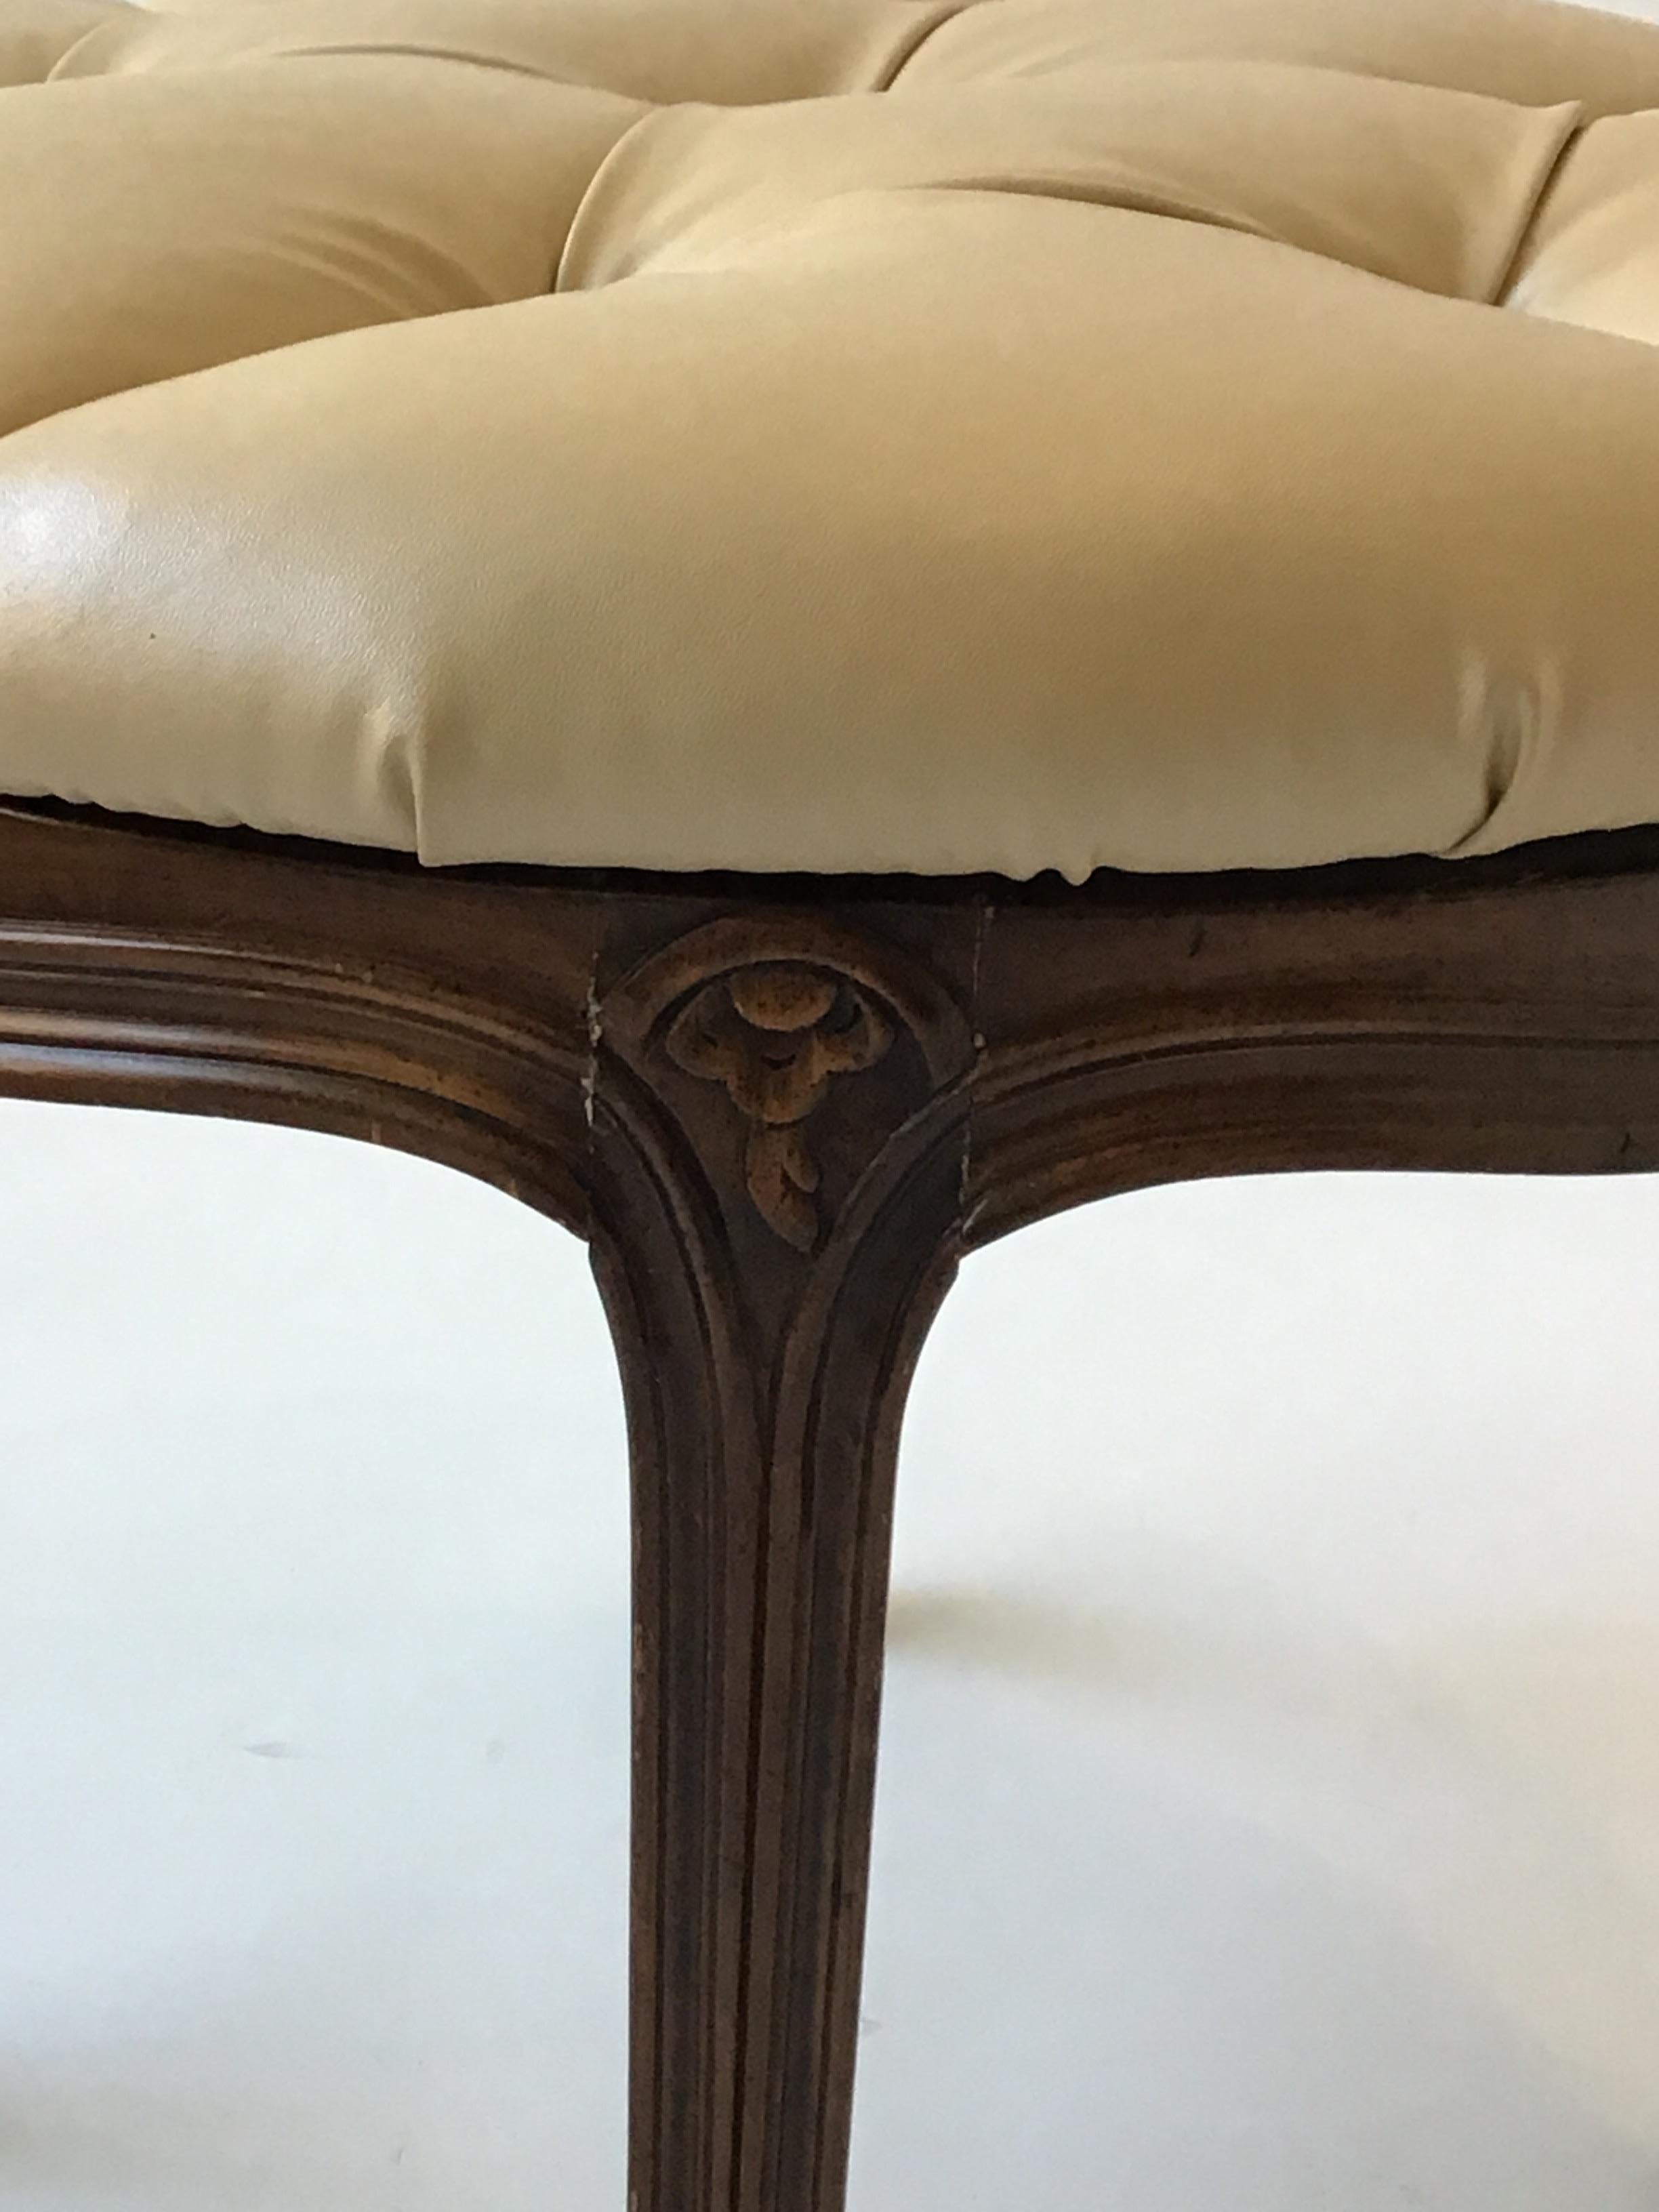 Mid-20th Century French Style Carved Wood Ottoman With Revolving Seat For Sale